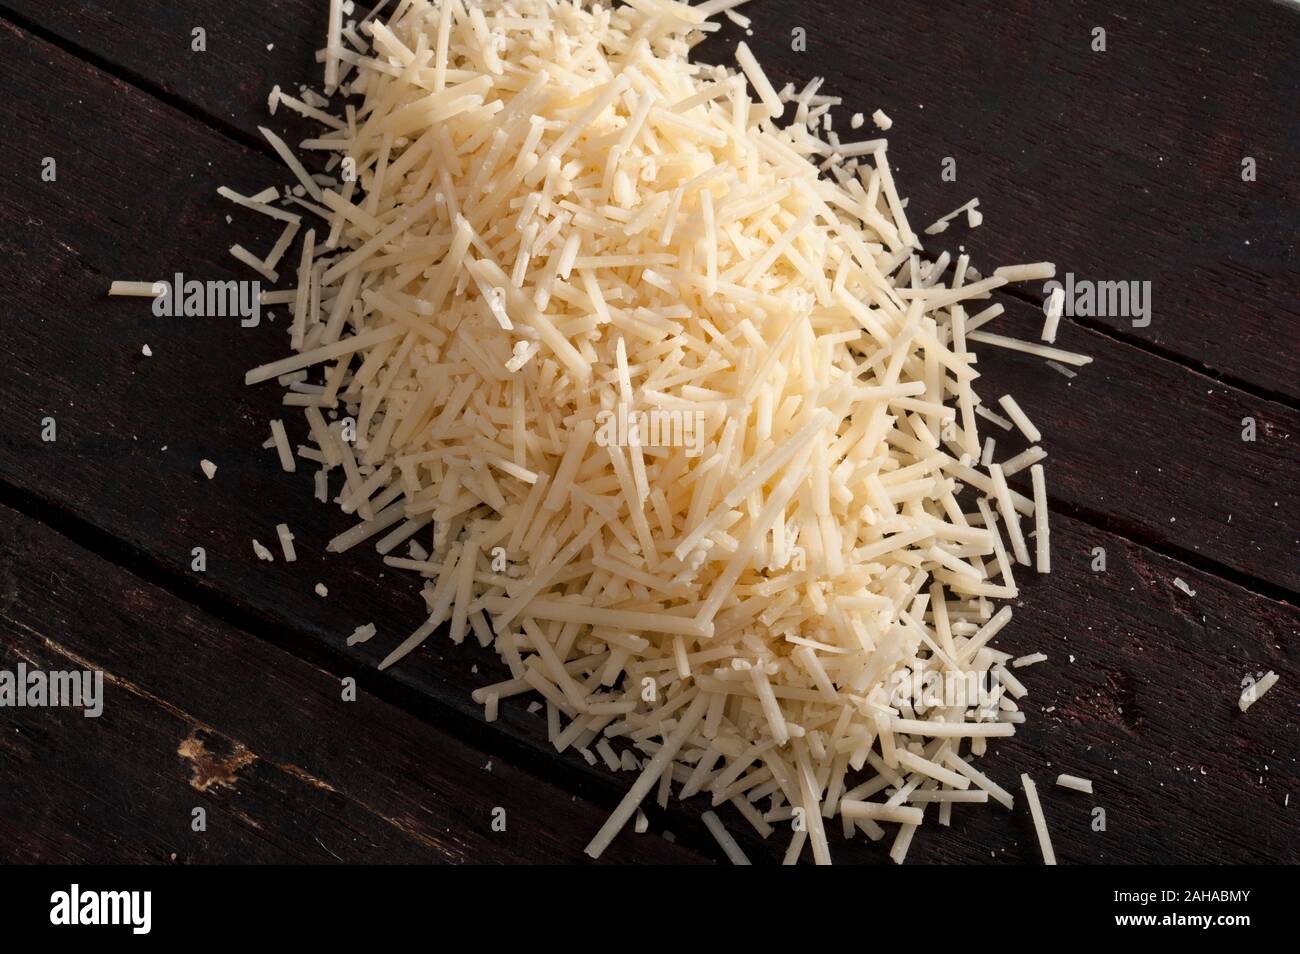 Shredded Parmesan Cheese Pile Stock Photo